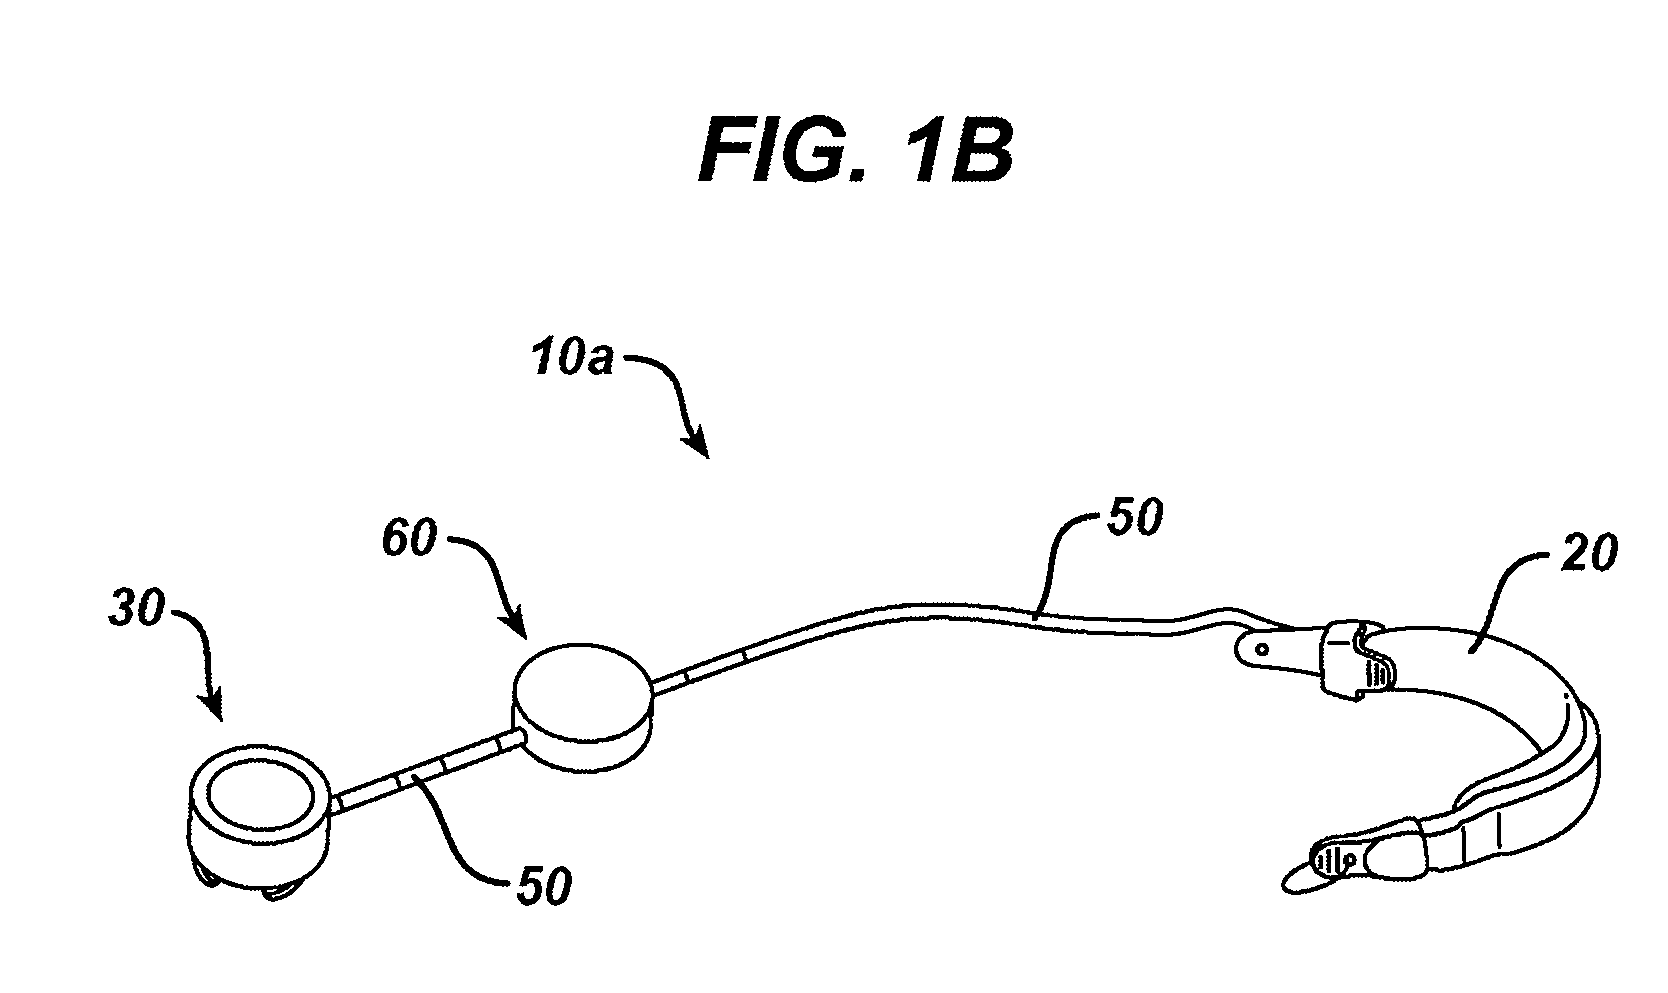 Methods and devices for measuring impedance in a gastric restriction system